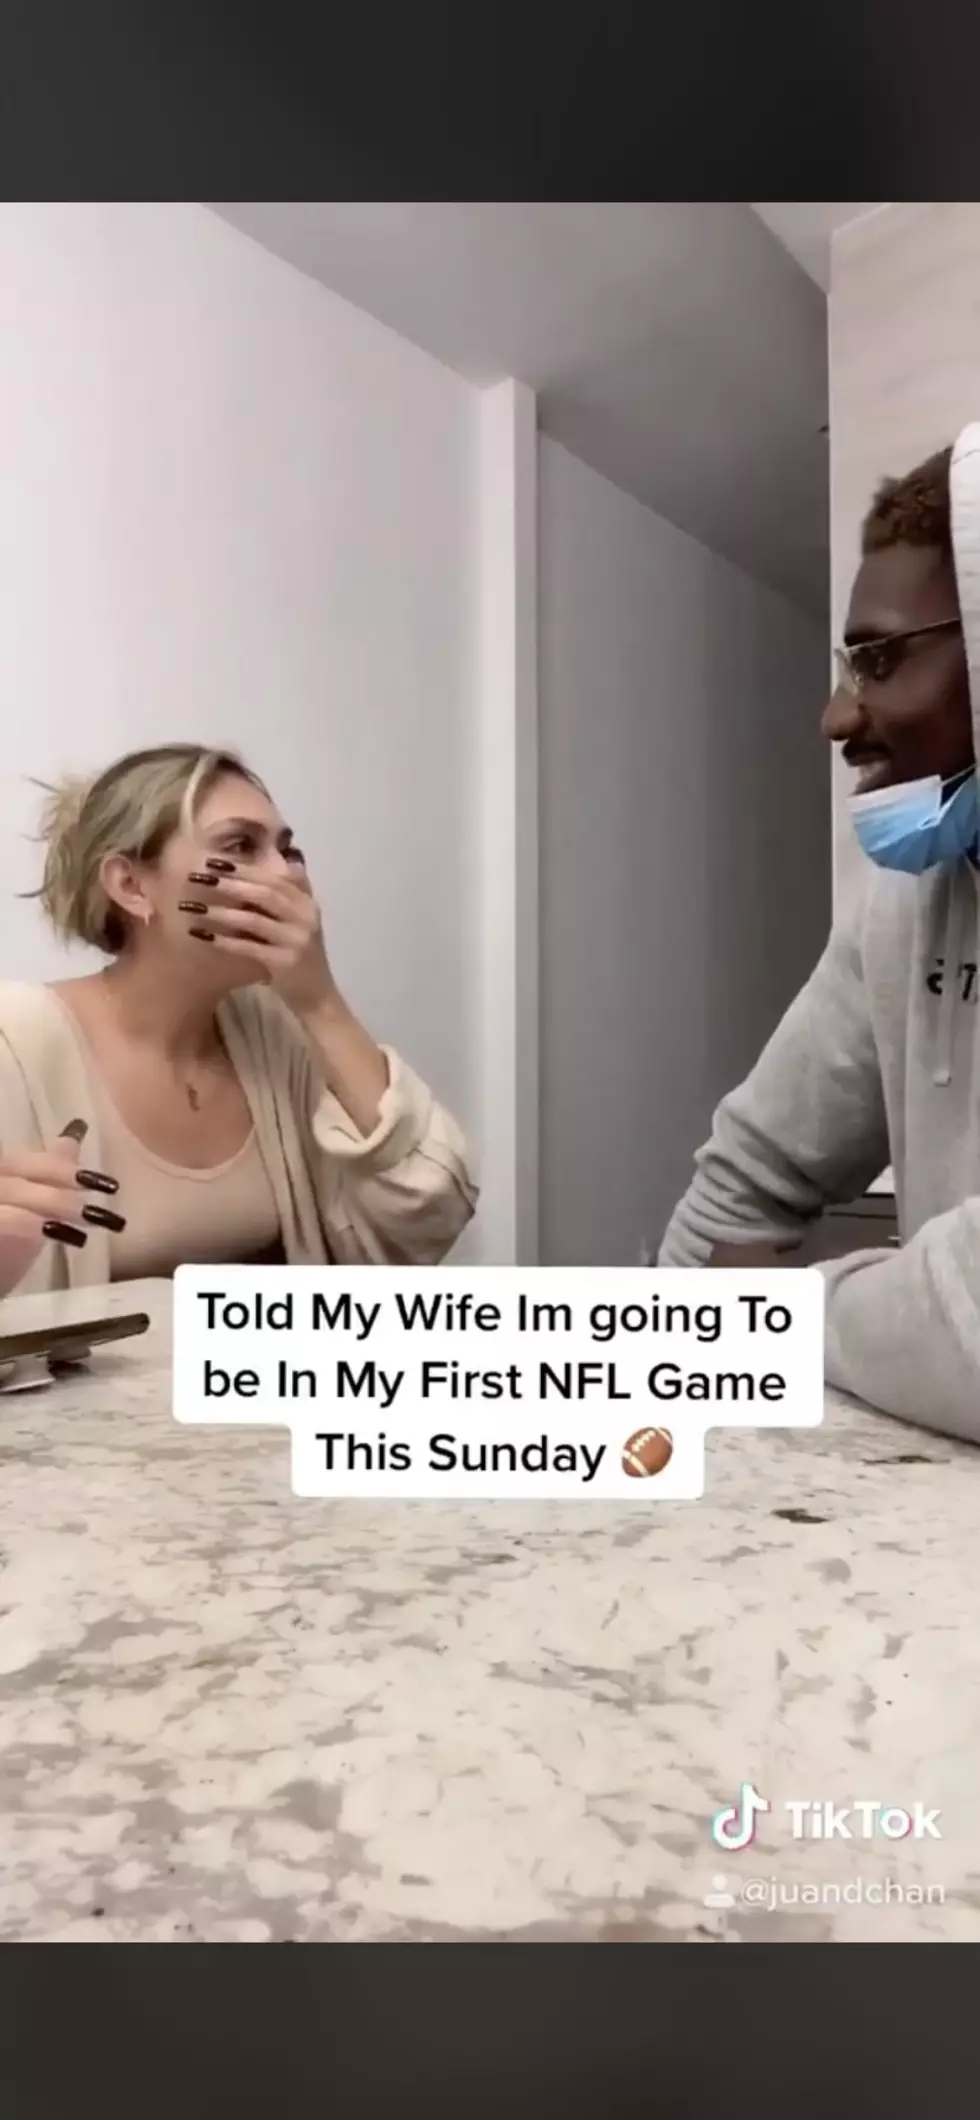 New Orleans Saints Player Delivers Big News To His Wife And Her Reaction Is Priceless